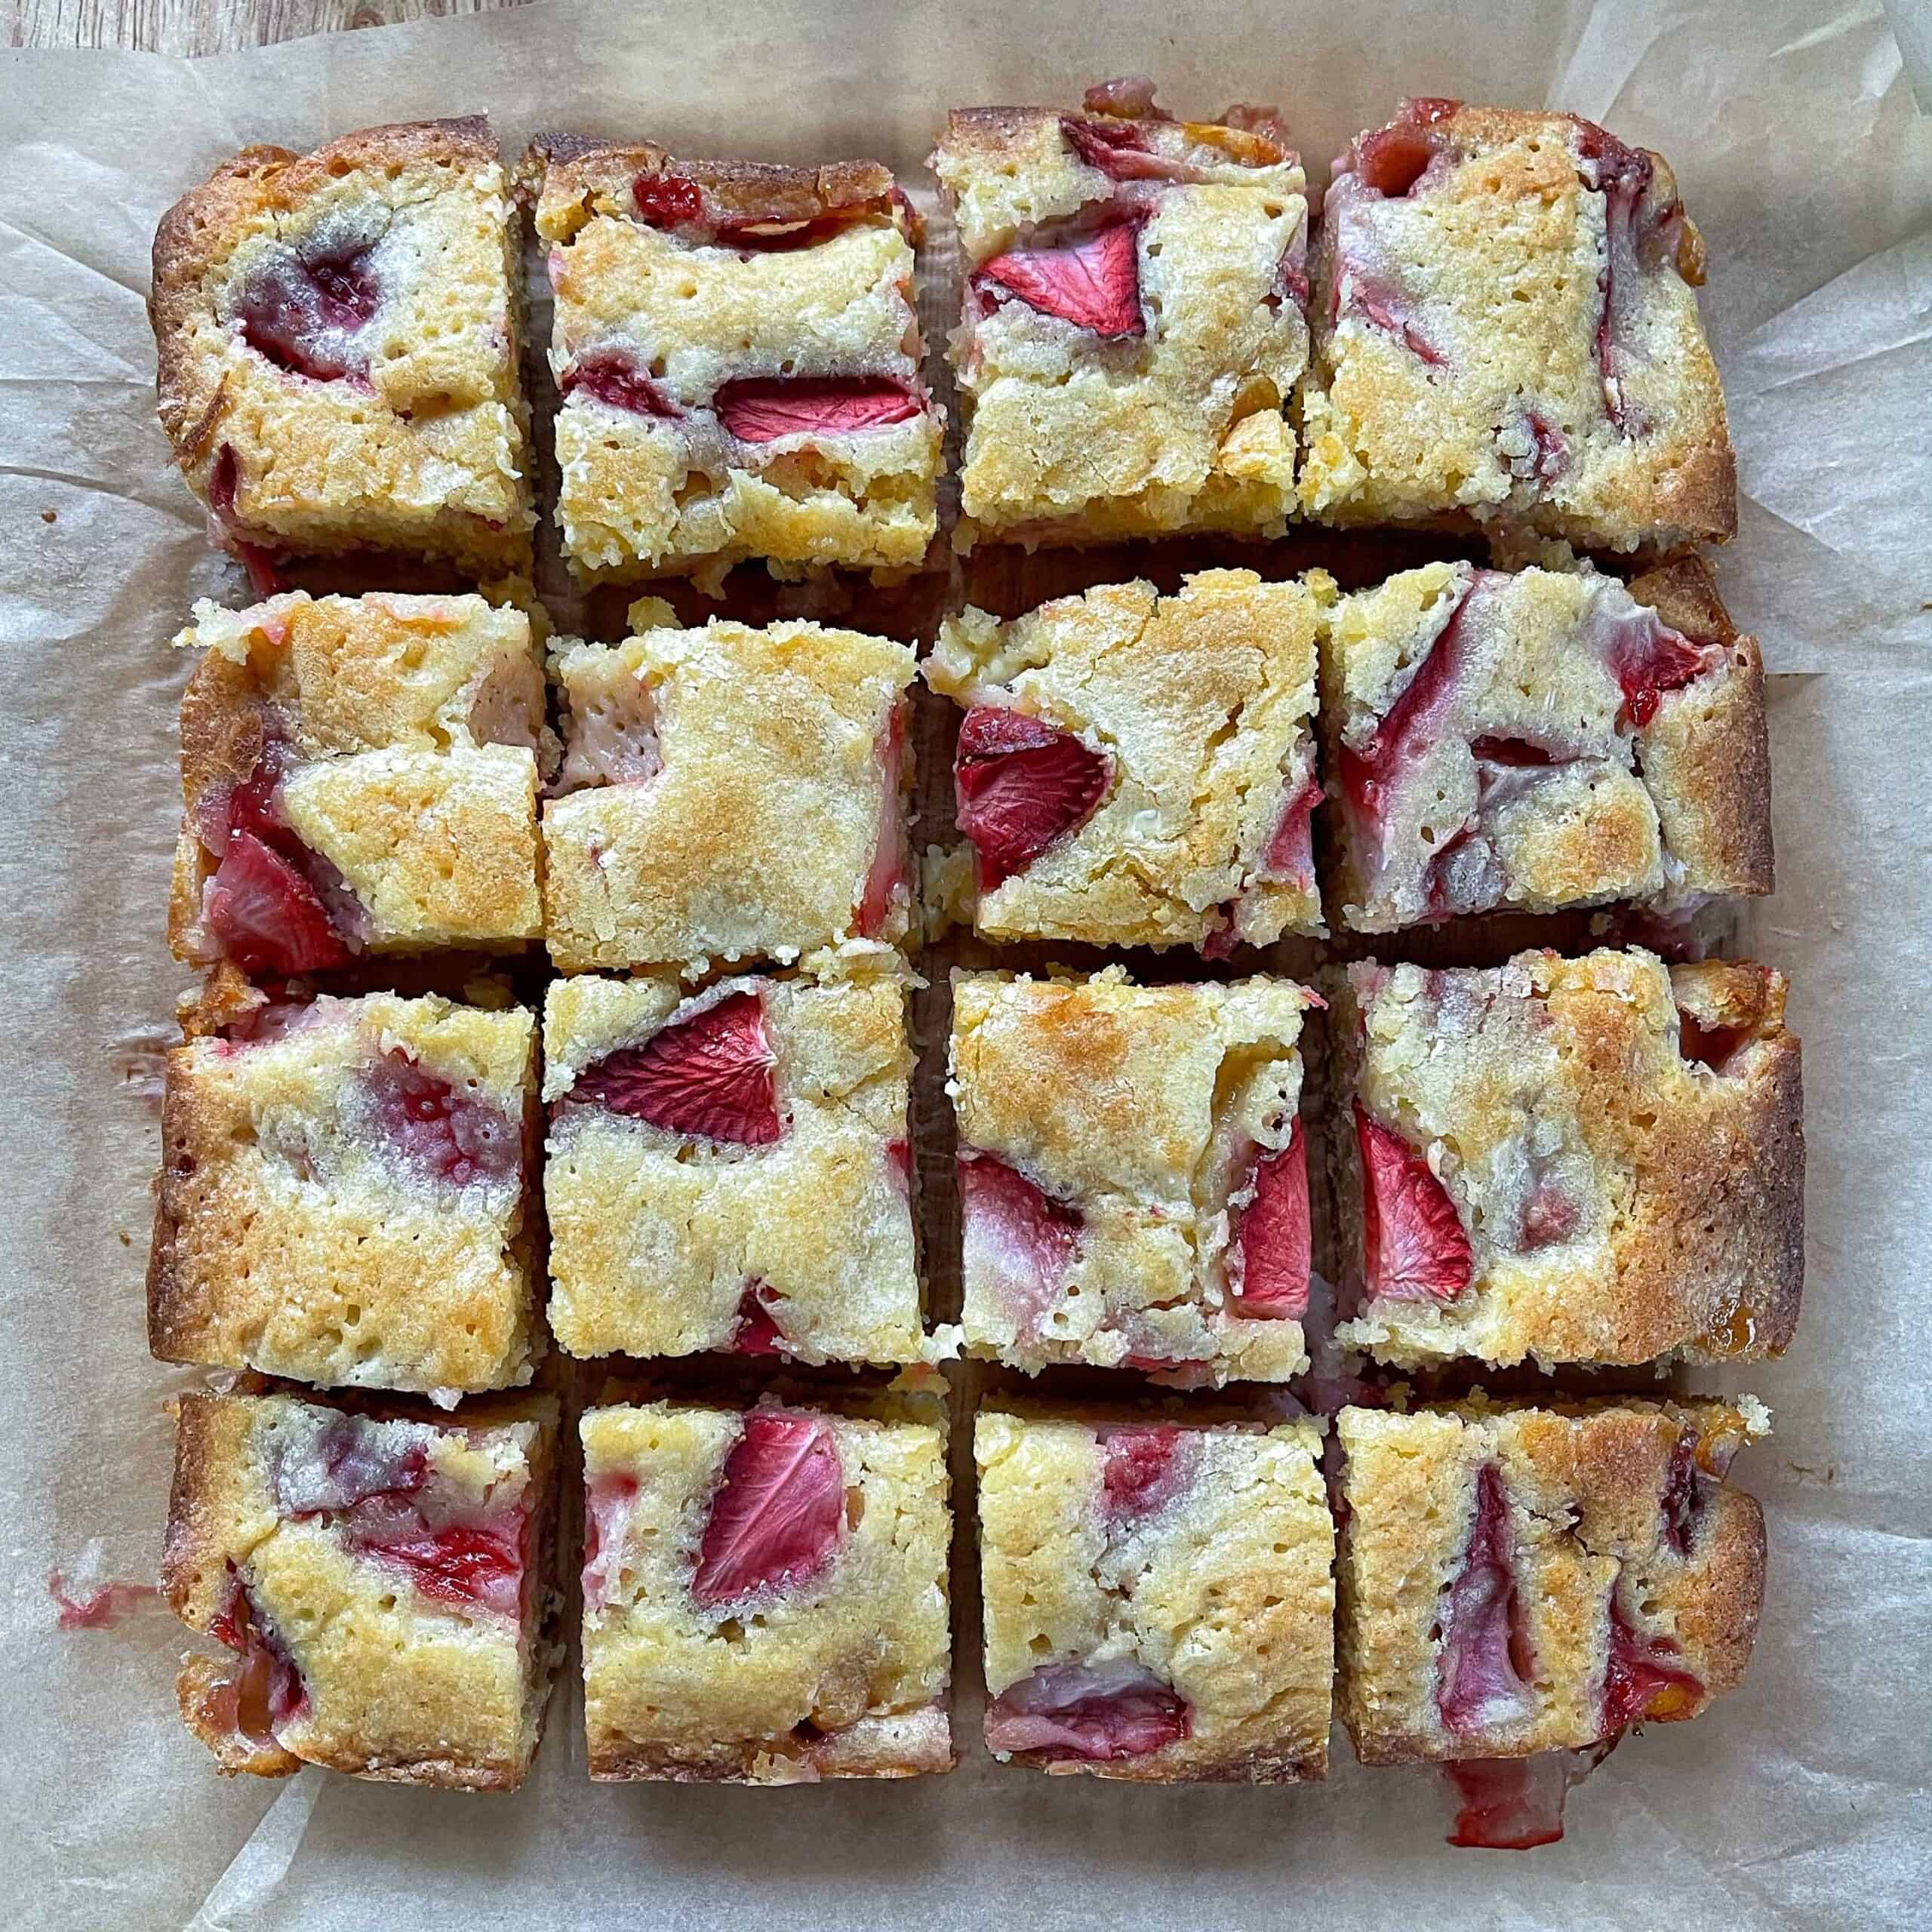 Cooked, sliced White Chocolate and Strawberry Blondie on a chopping board.